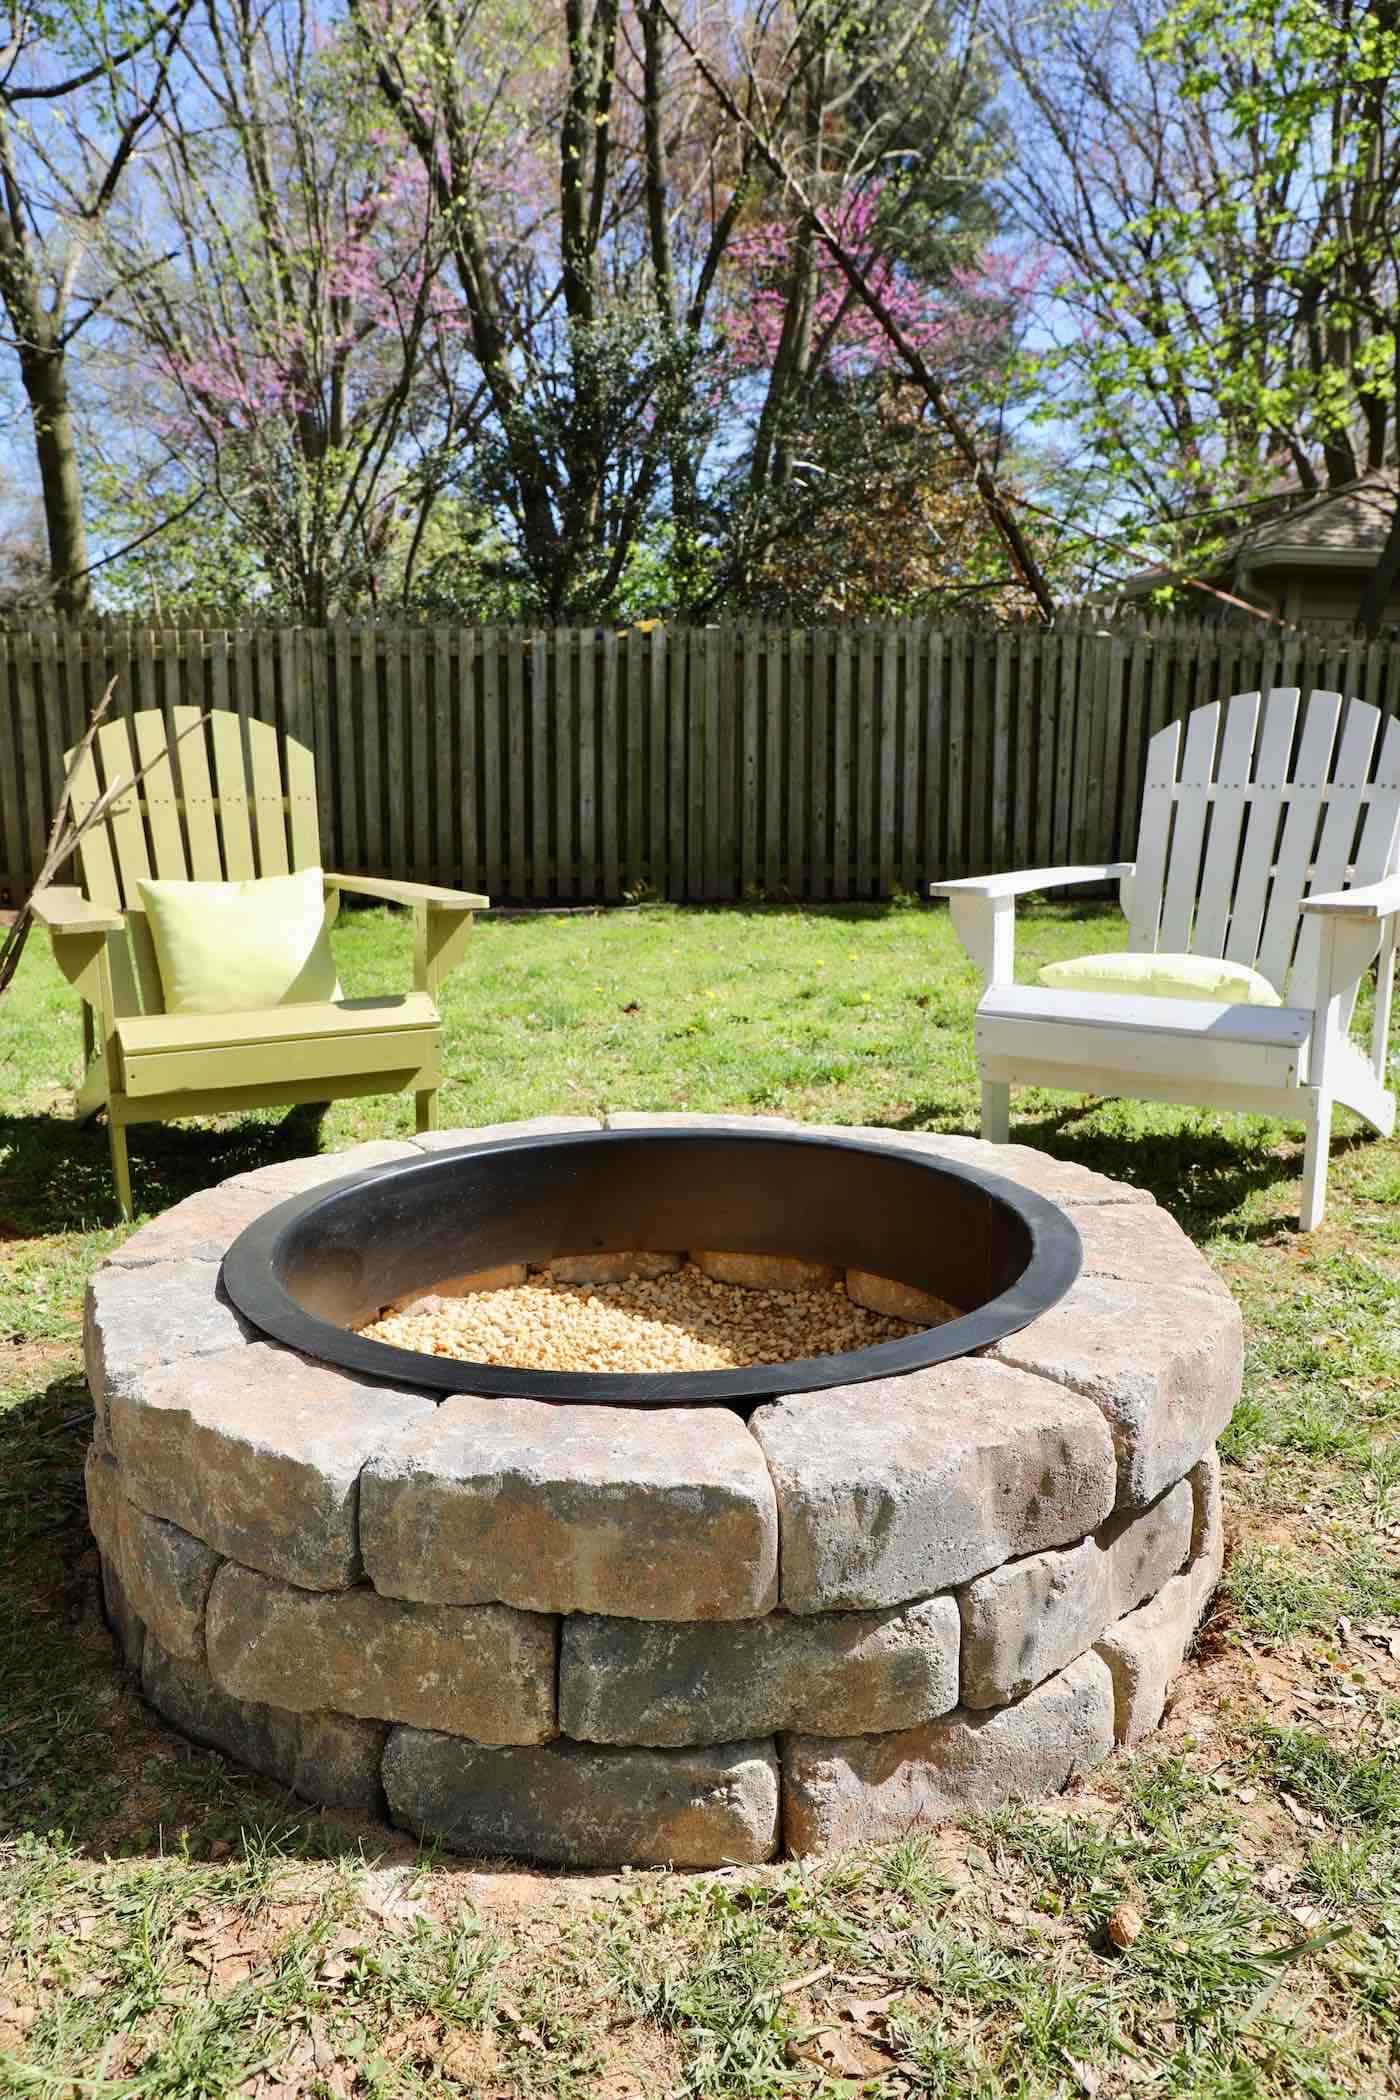 Diy Fire Pit With Gravel Stones, Pics Of Backyard Fire Pits